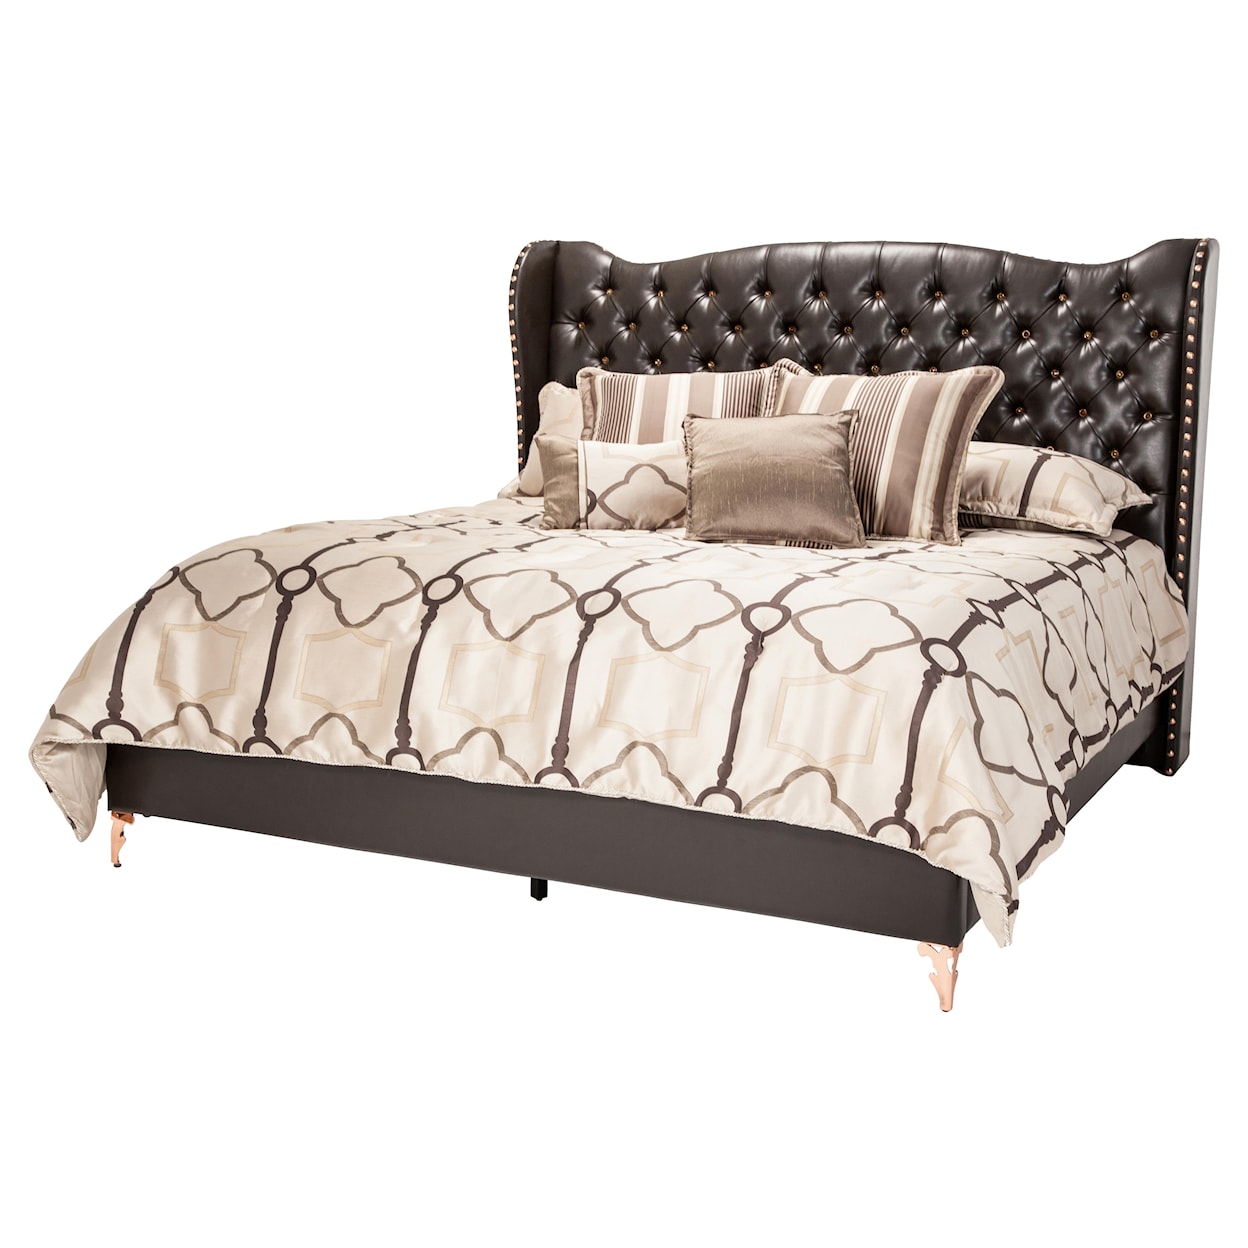 Michael Amini Hollywood Loft Queen Size Upholstered Bed